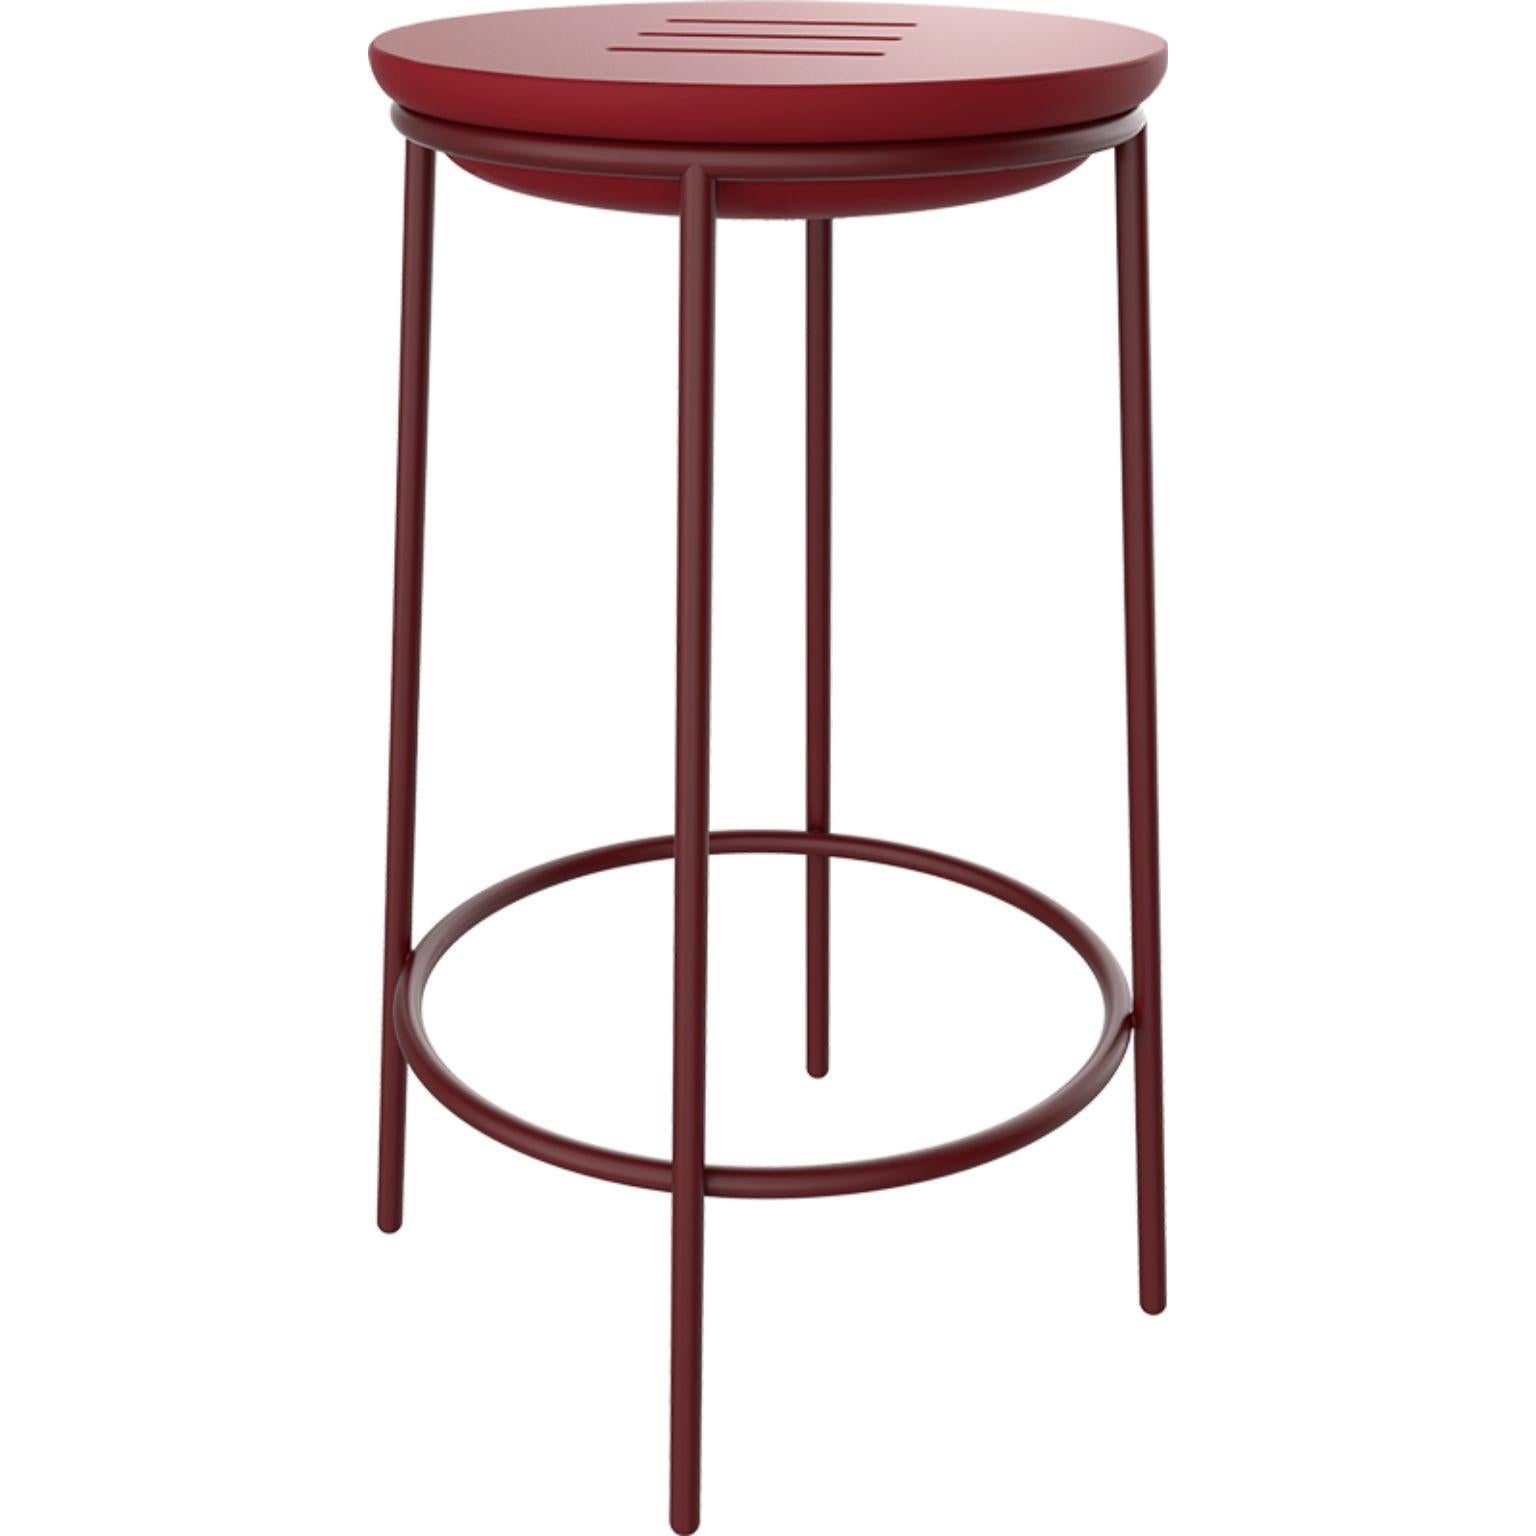 Lace Burgundy 60 high table by MOWEE
Dimensions: D75 x H111 cm
Material: Polyethylene and stainless steel
Weight: 10.5 kg
Also available in different colors and finishes. 

Lace is a collection of furniture made by rotomoulding. Its shape